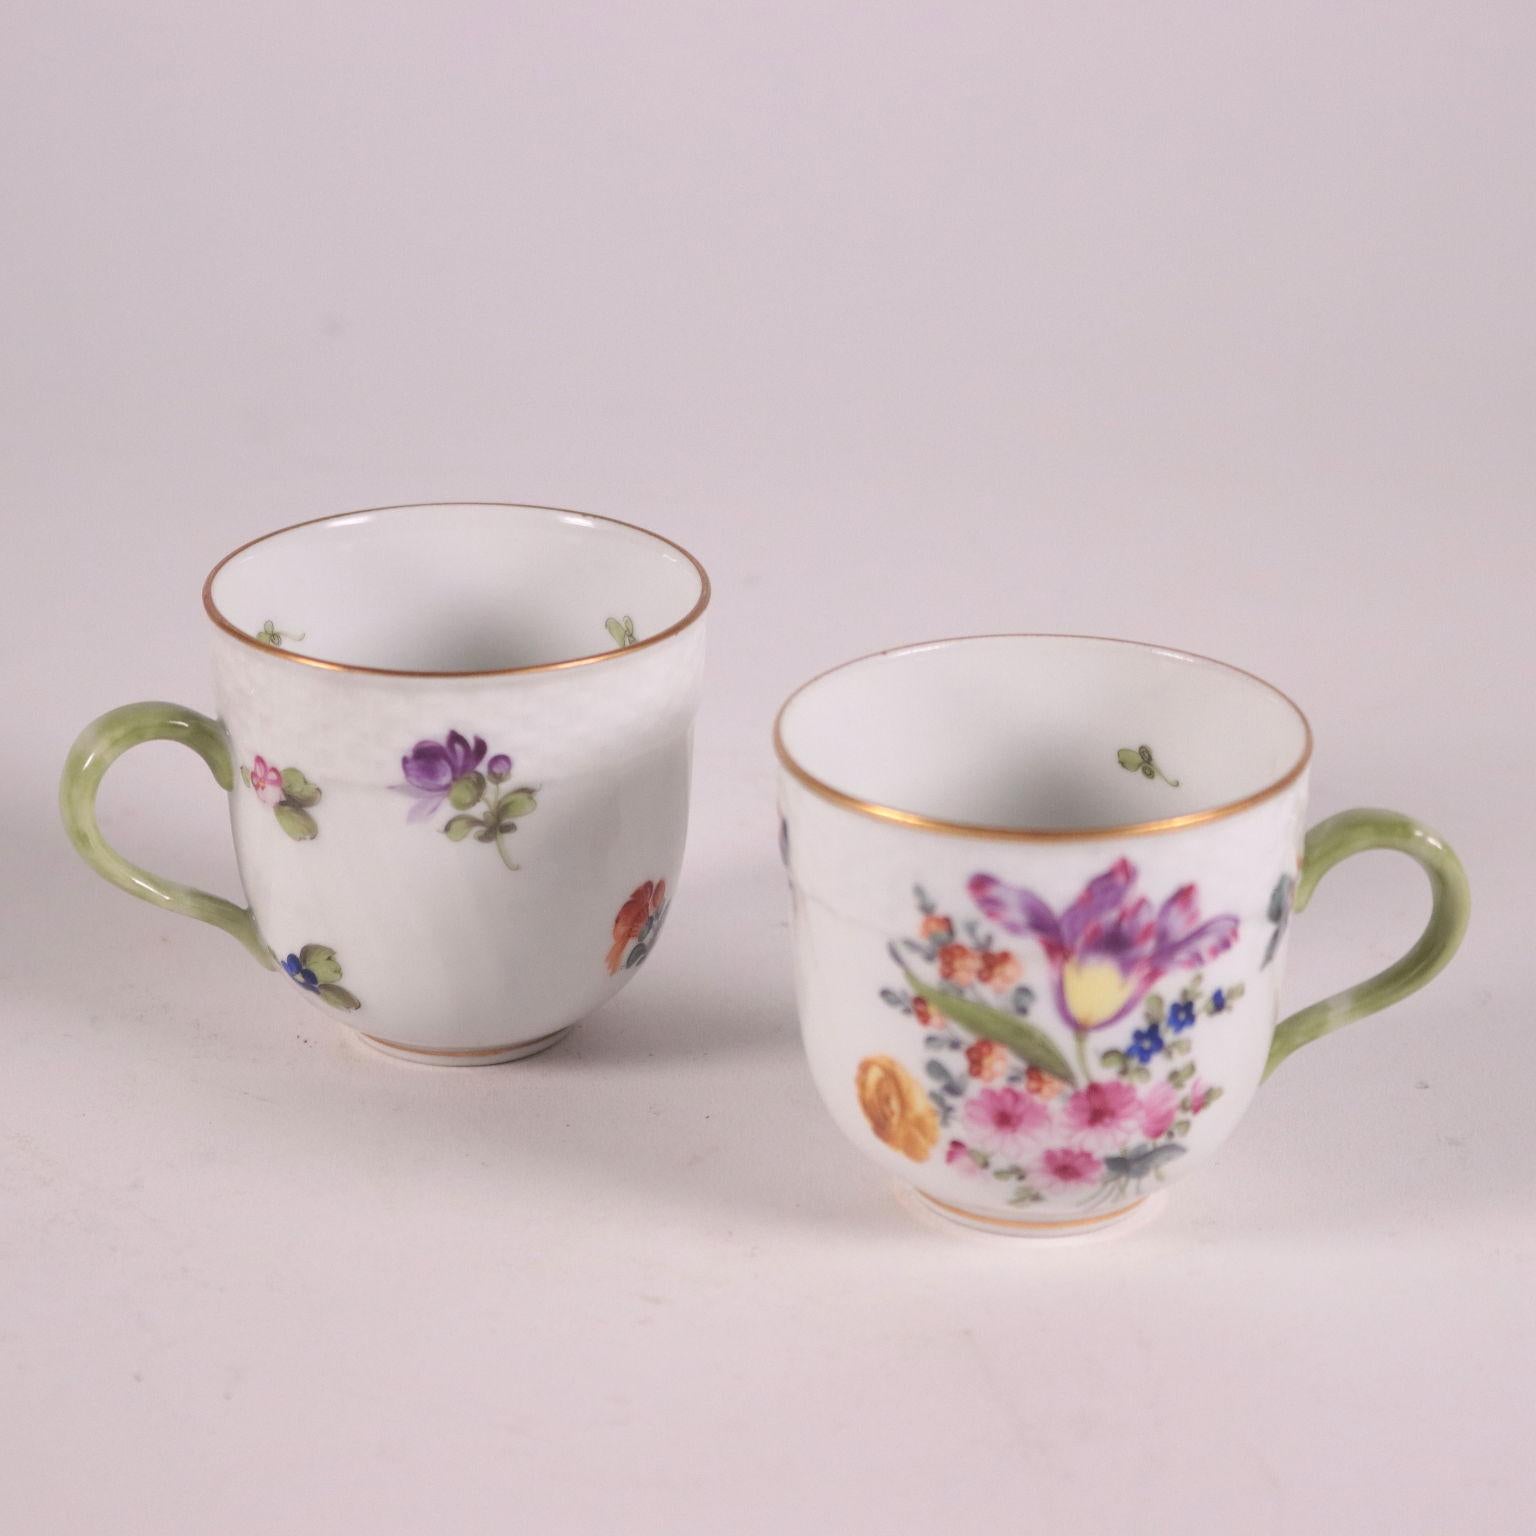 Herend Hungary Coffee Set Porcelain, 20th Century For Sale 3